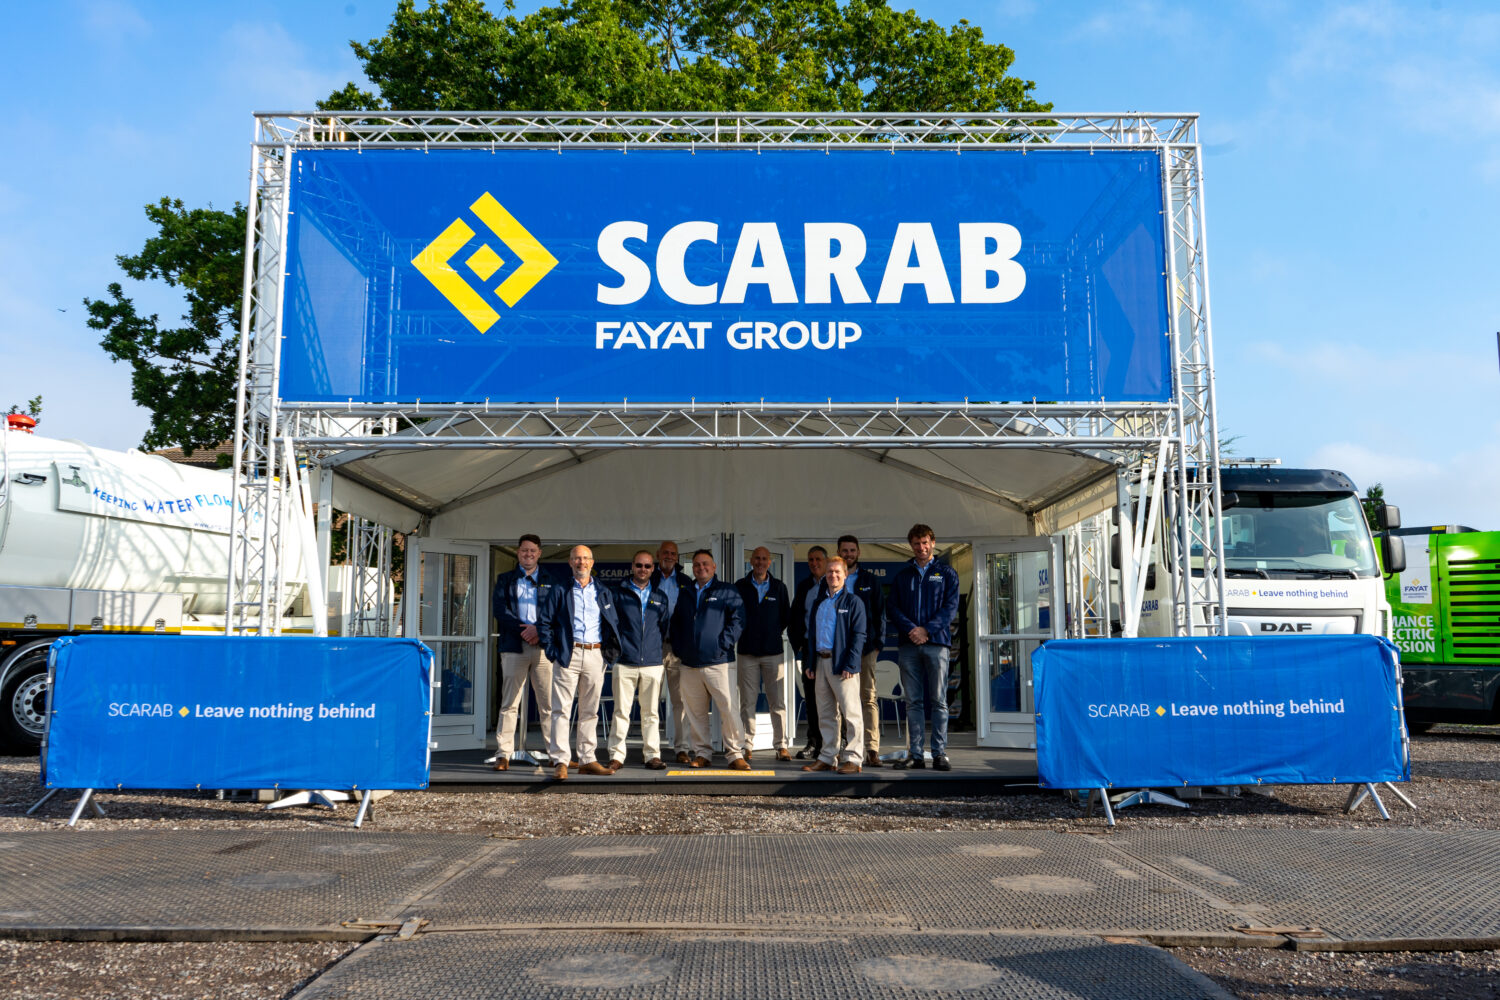 It’s Showtime! Scarab Showcase Latest Innovations at LetsRecycle Live